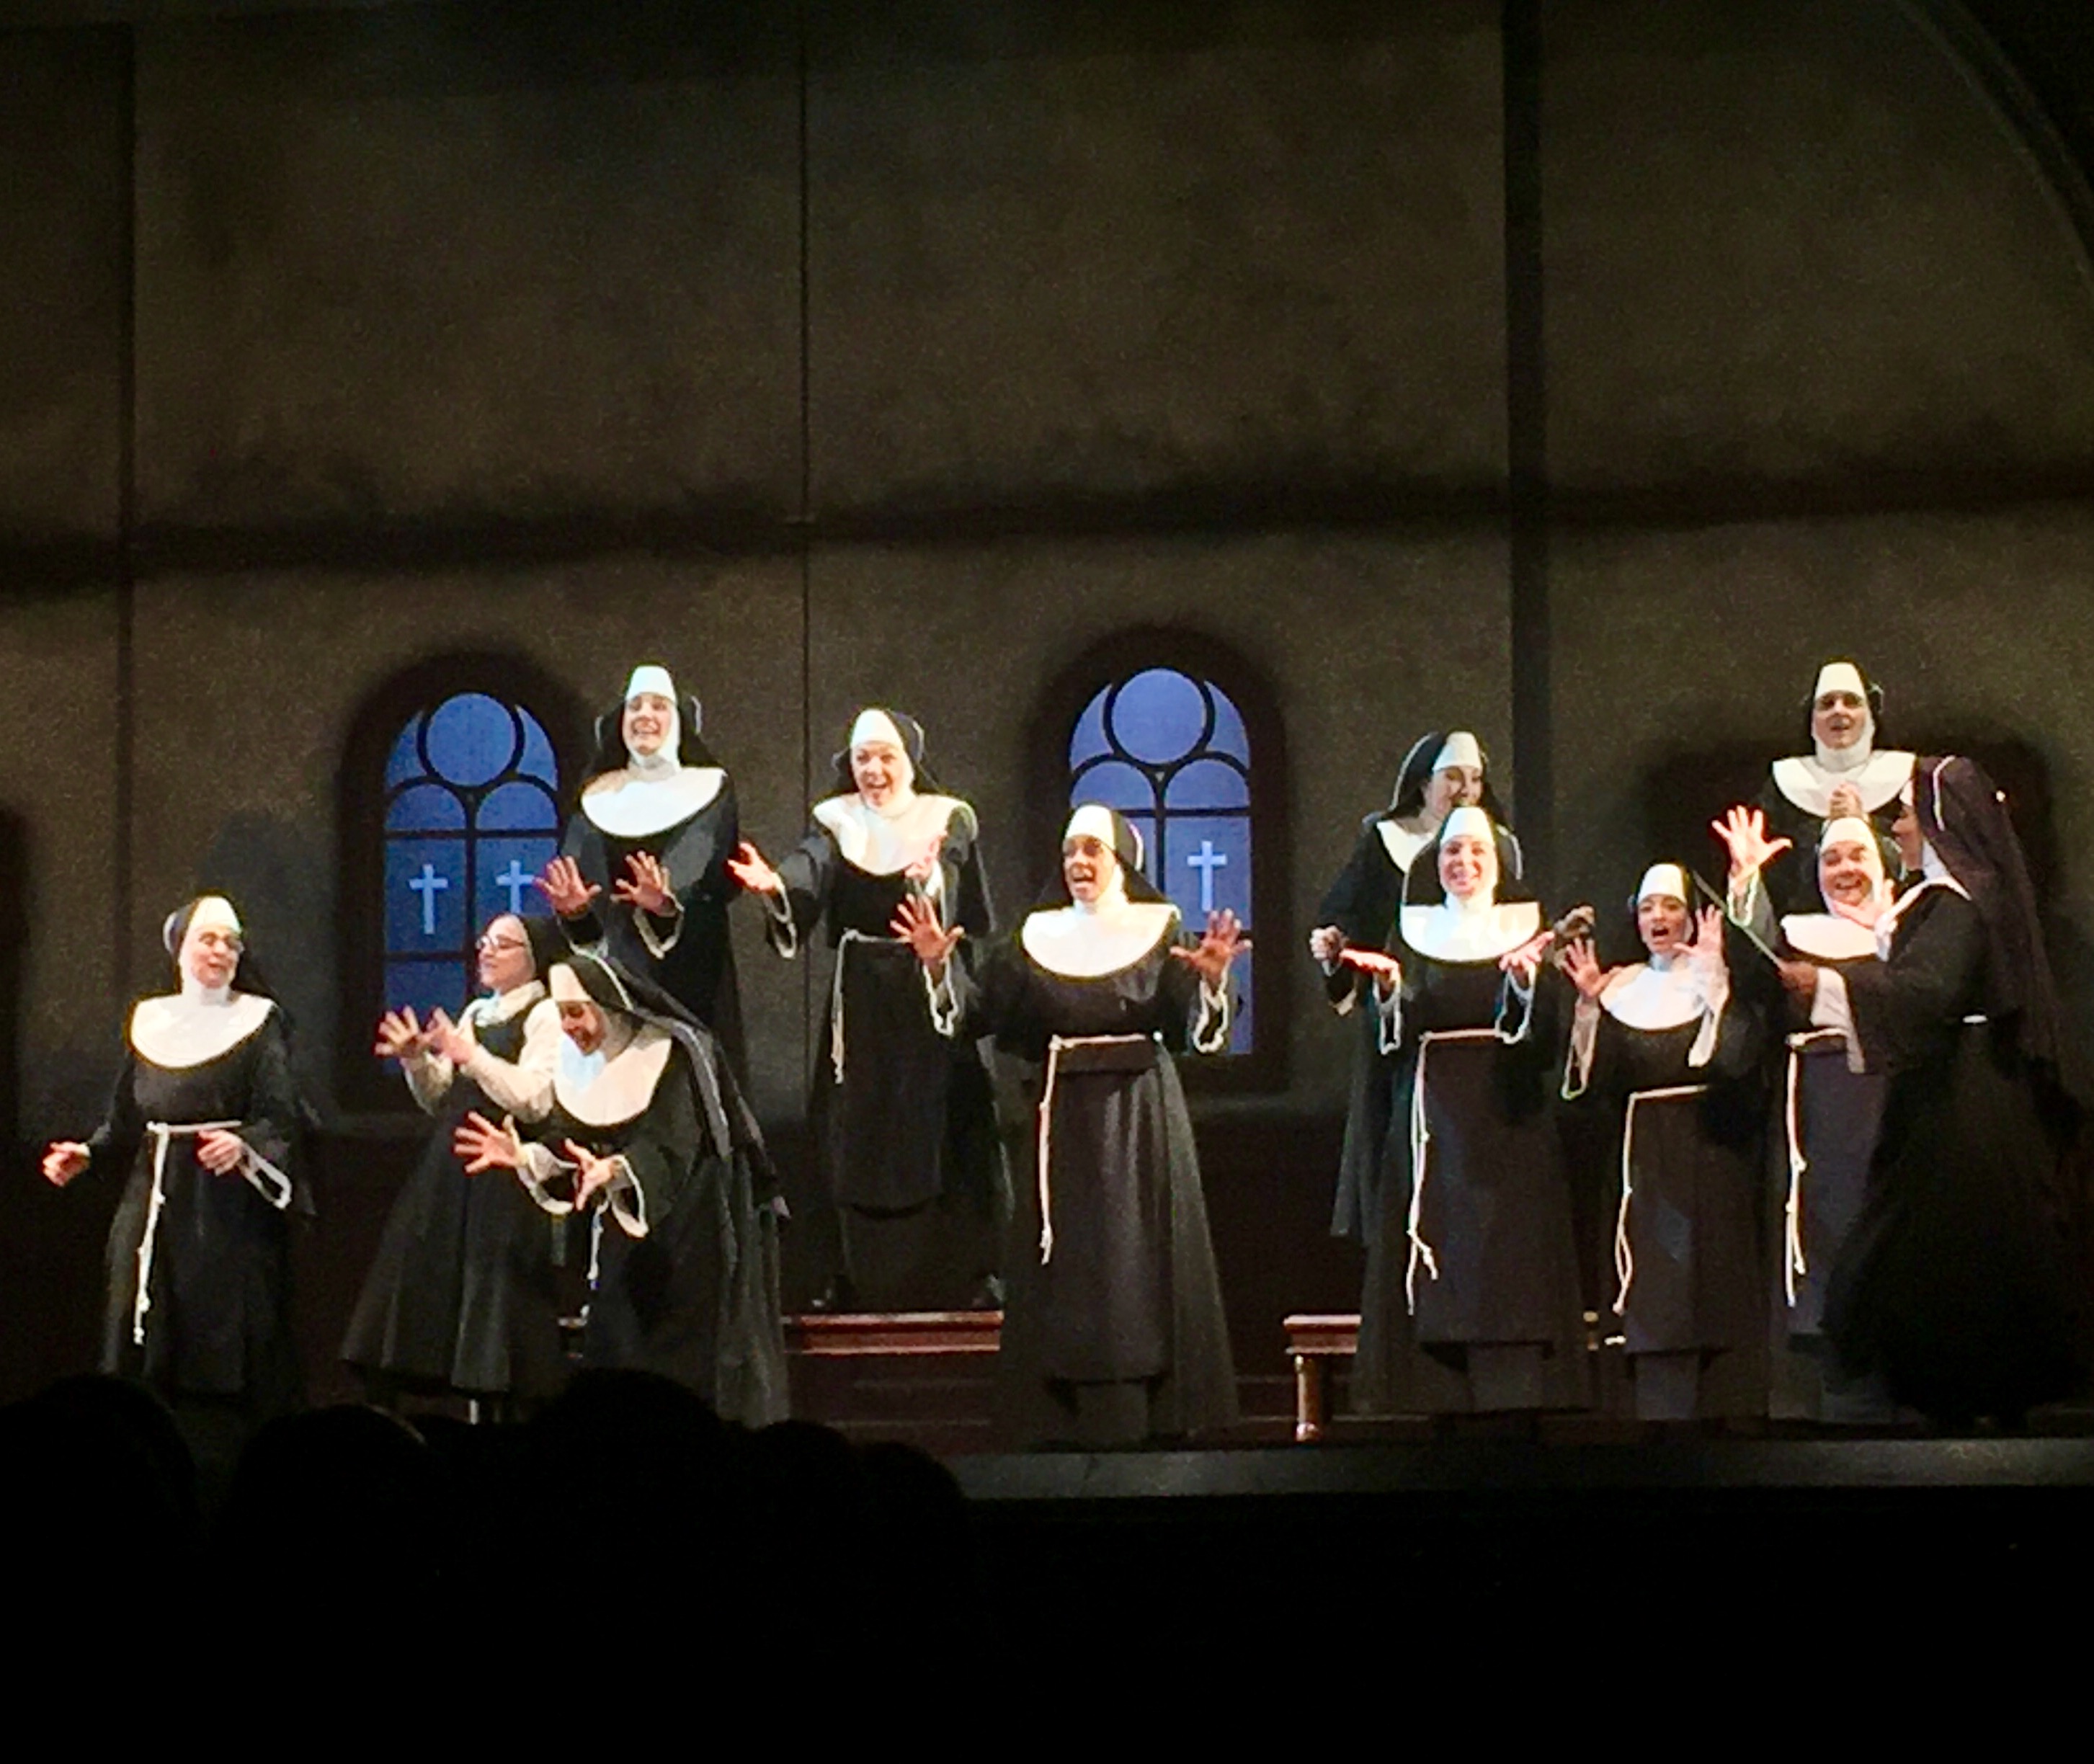 Sister Act the musical